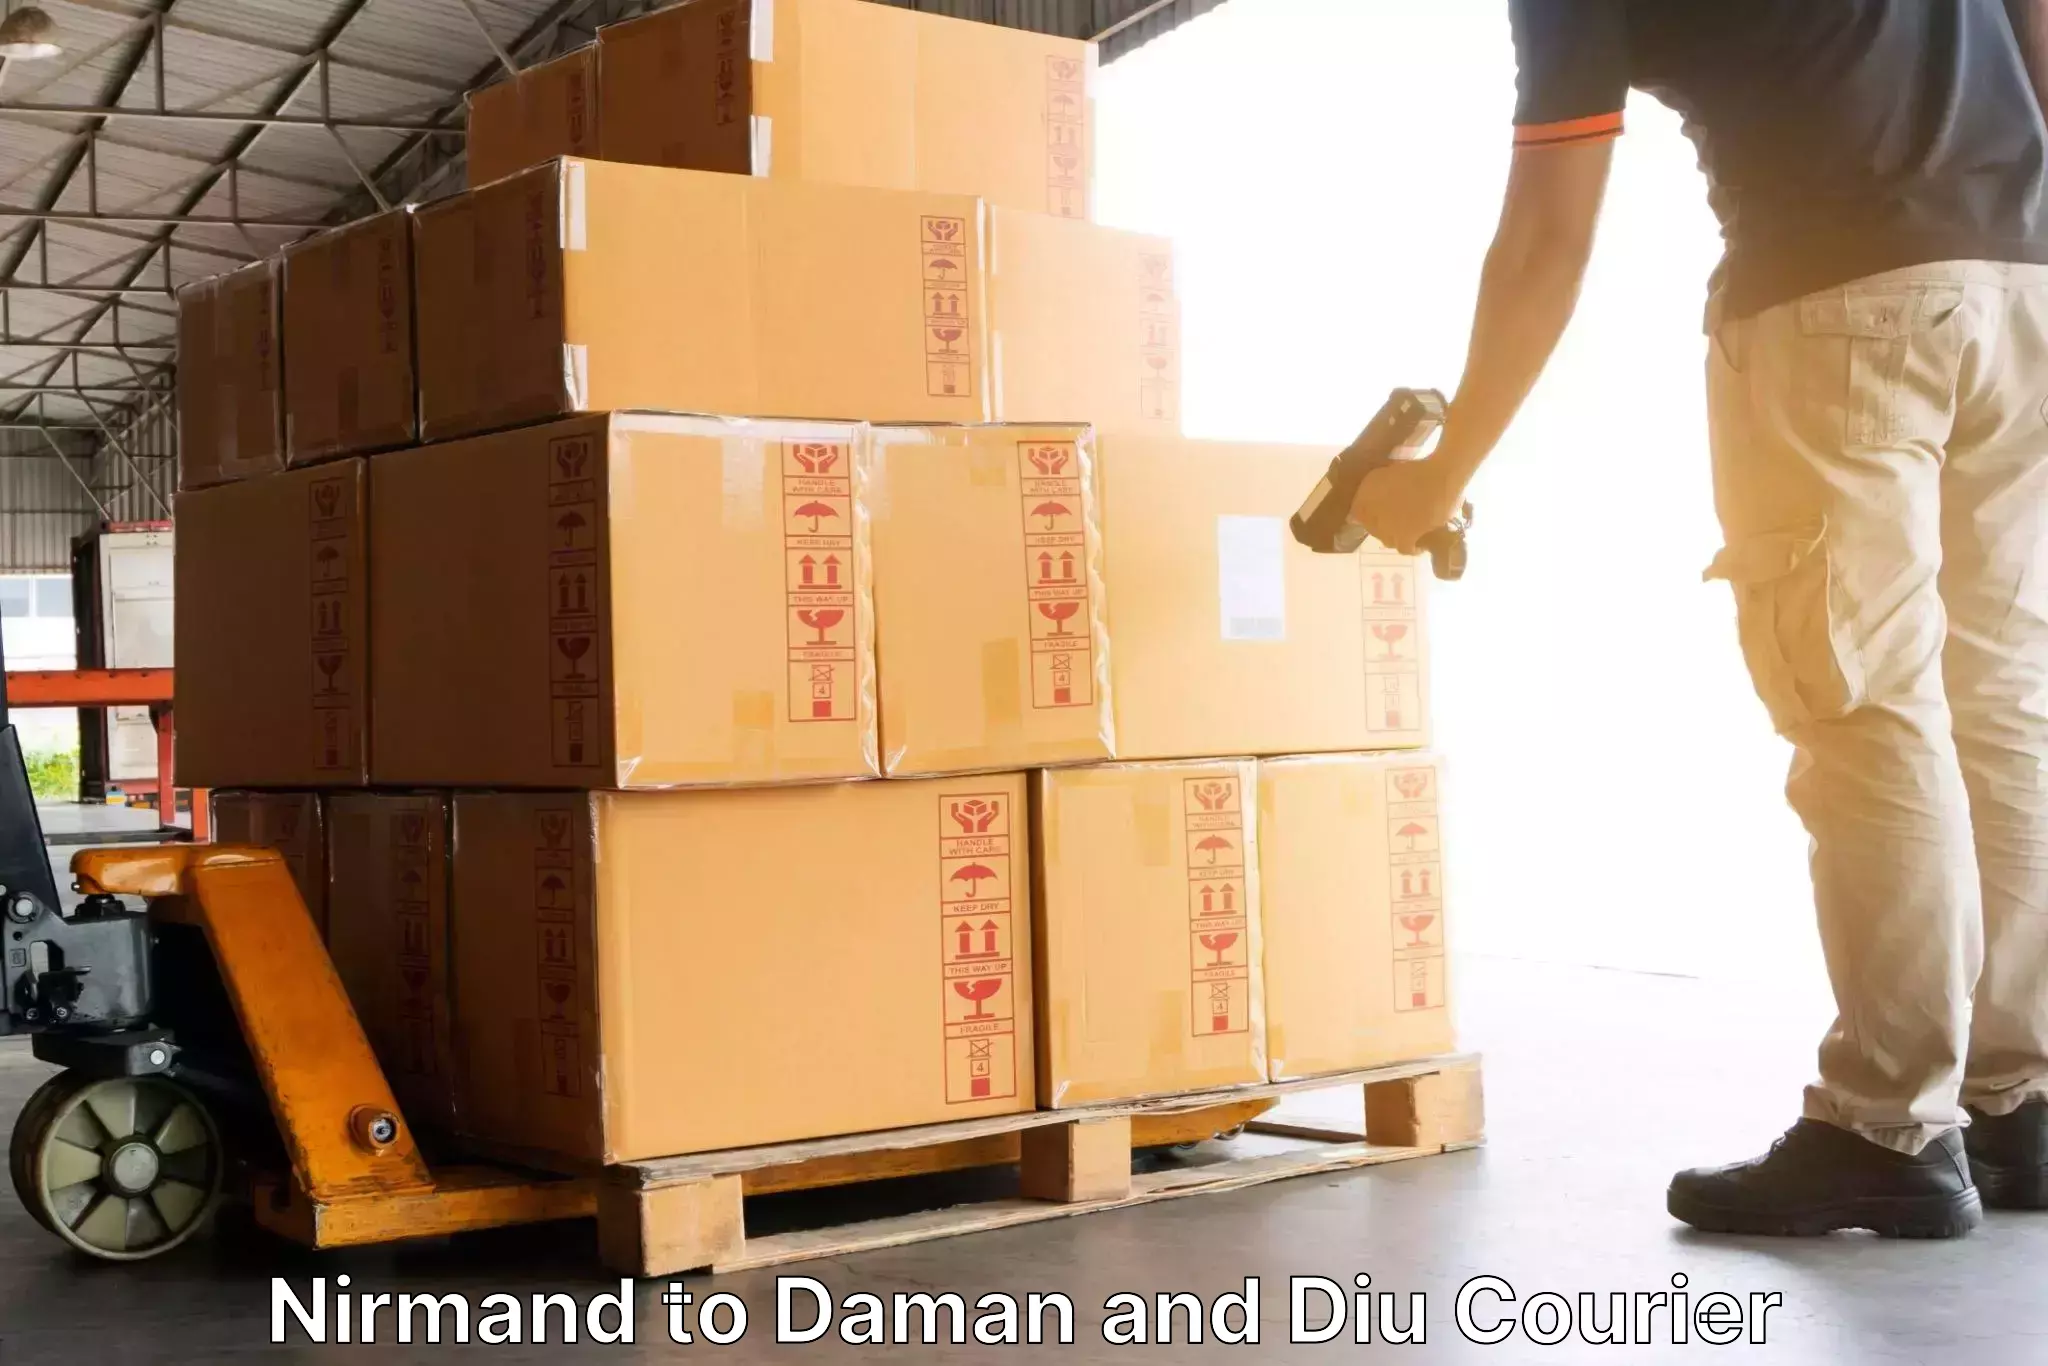 Express courier facilities in Nirmand to Diu